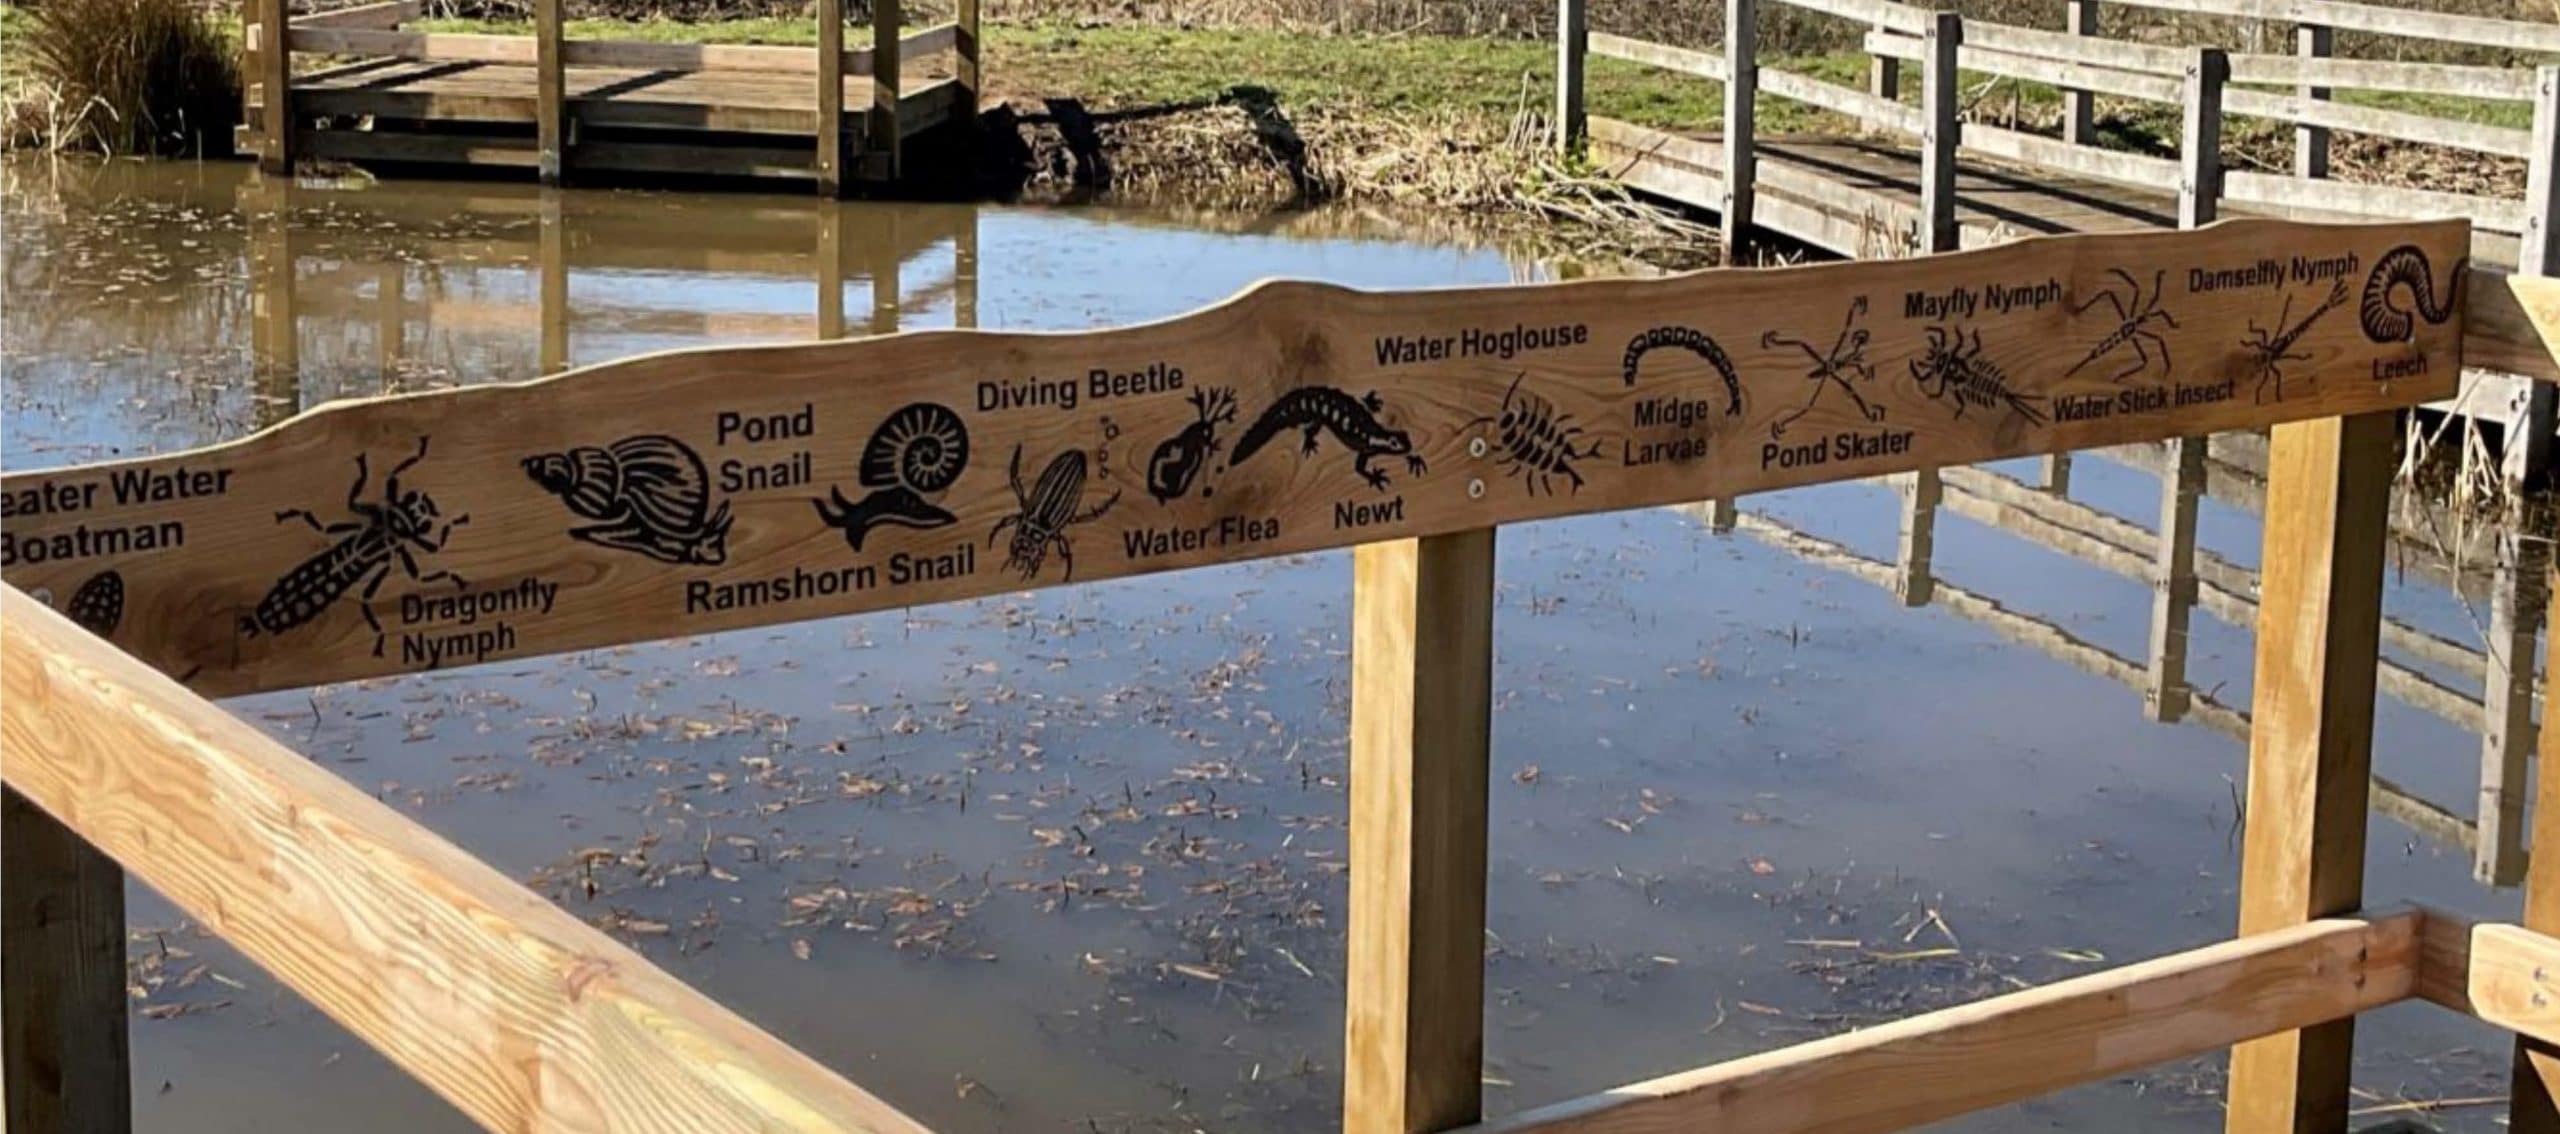 pond creatures etched onto a wooden rail